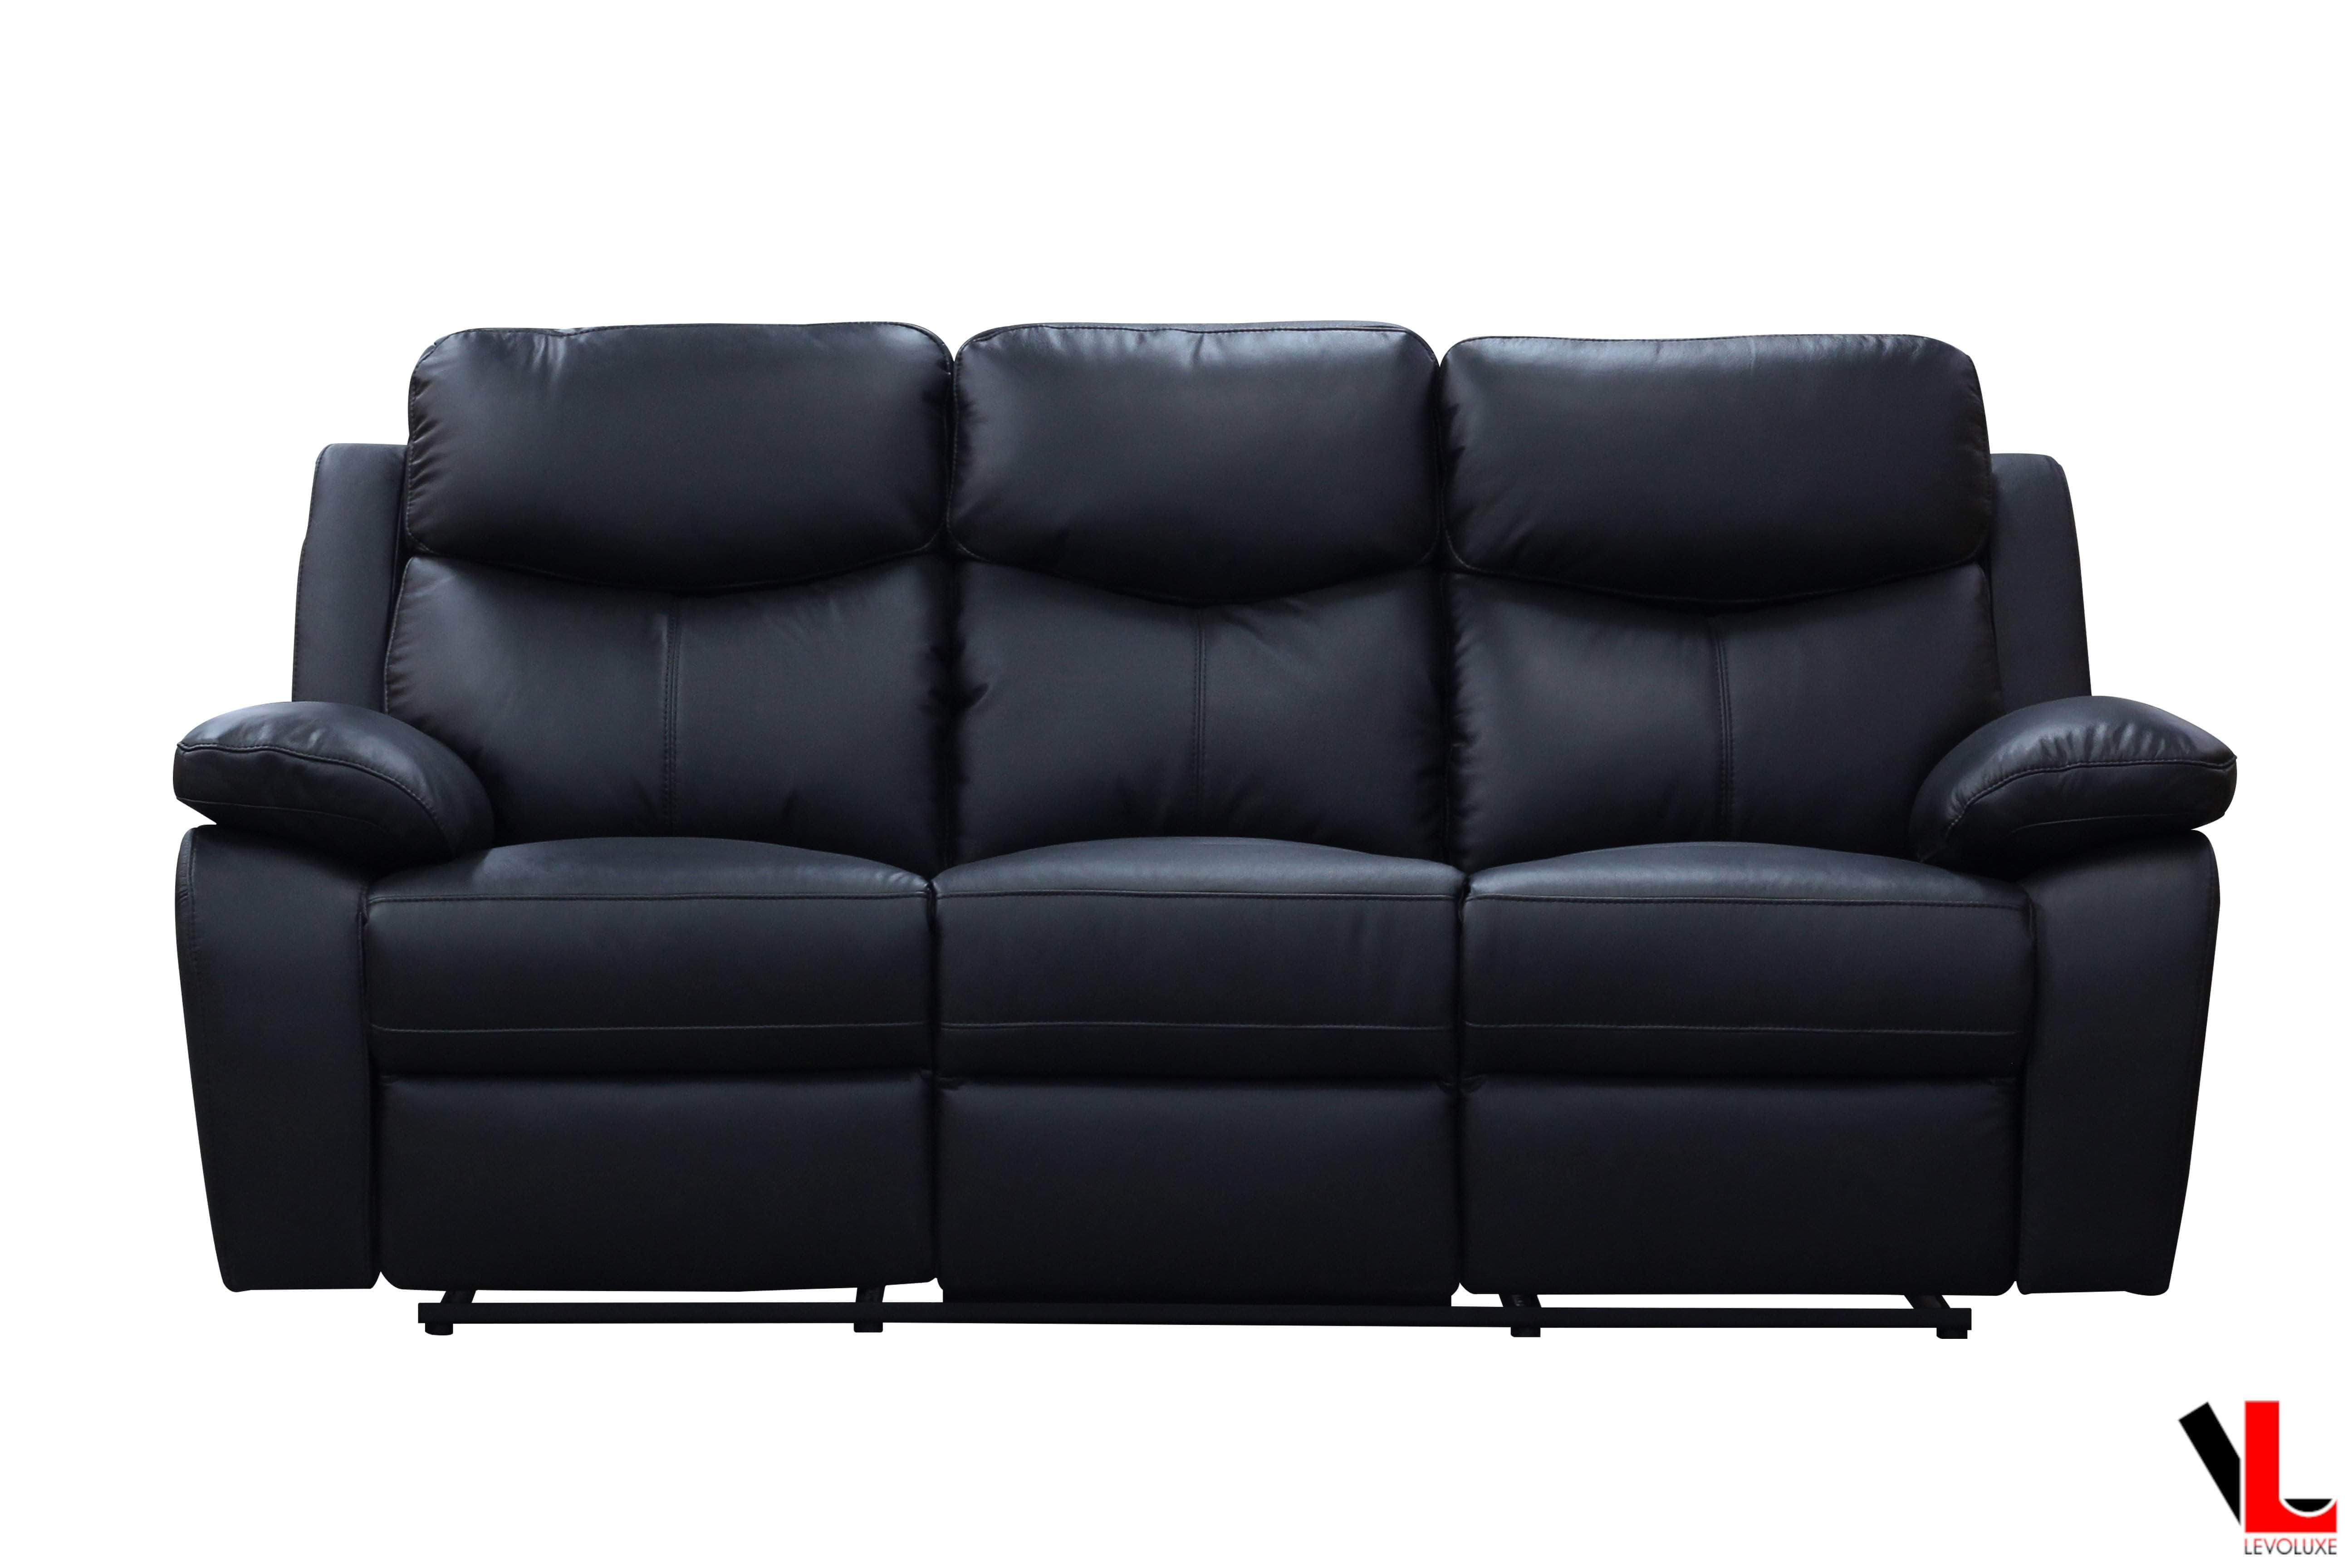 Pending - Levoluxe Aveon 2 Piece Pillow Top Arm Reclining Sofa and Loveseat Set in Leather Match - Available in 2 Colours